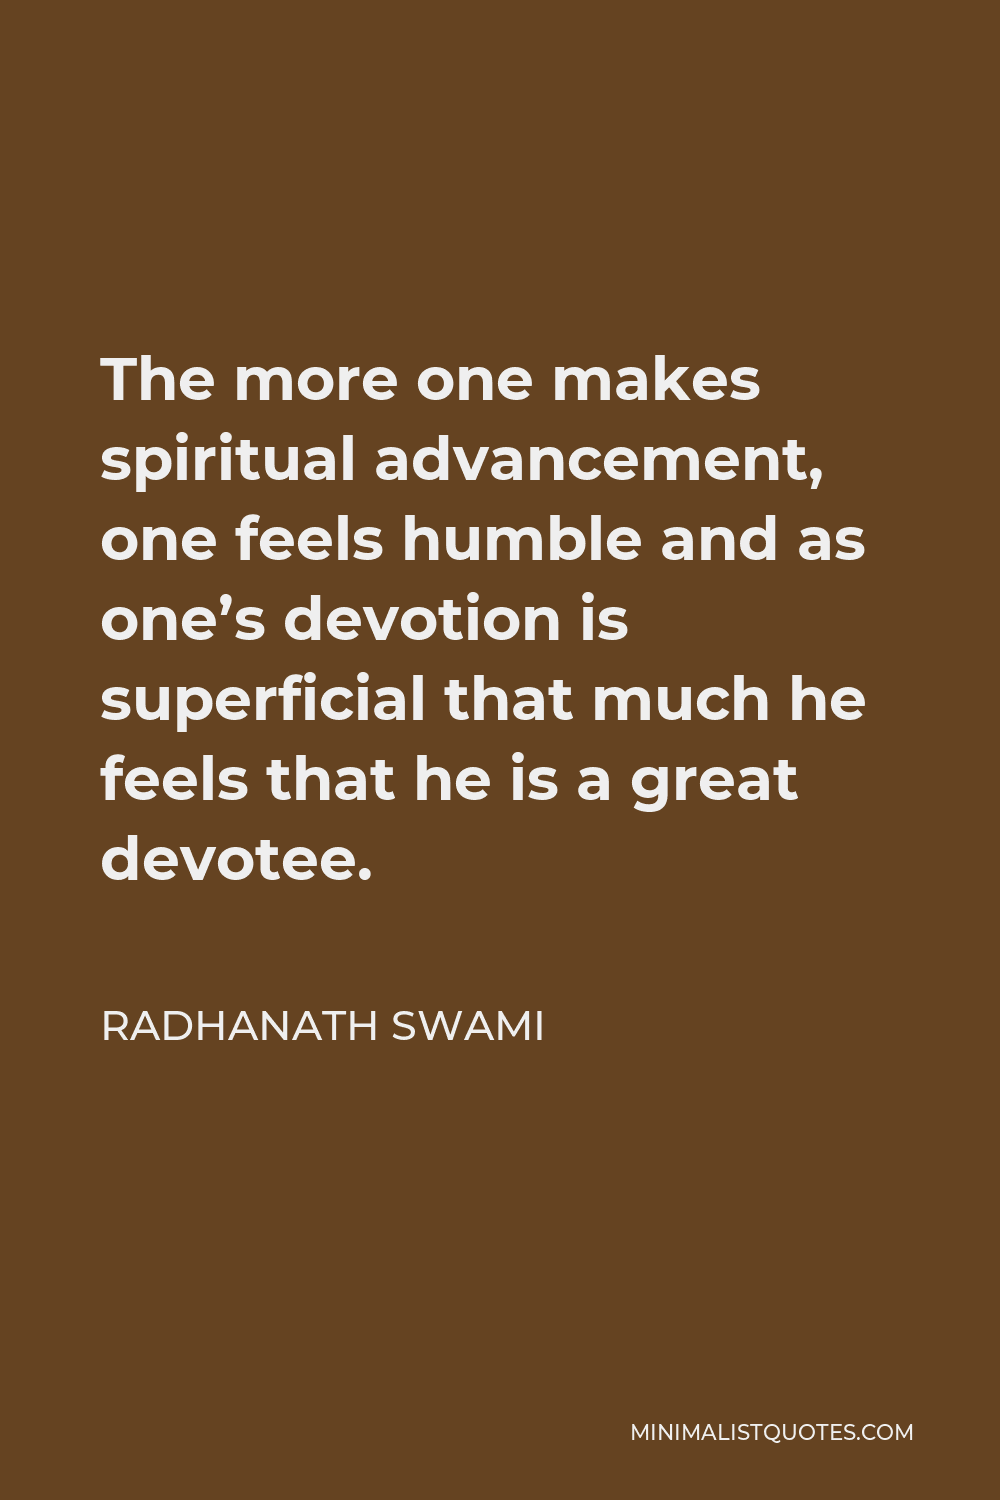 Radhanath Swami Quote - The more one makes spiritual advancement, one feels humble and as one’s devotion is superficial that much he feels that he is a great devotee.